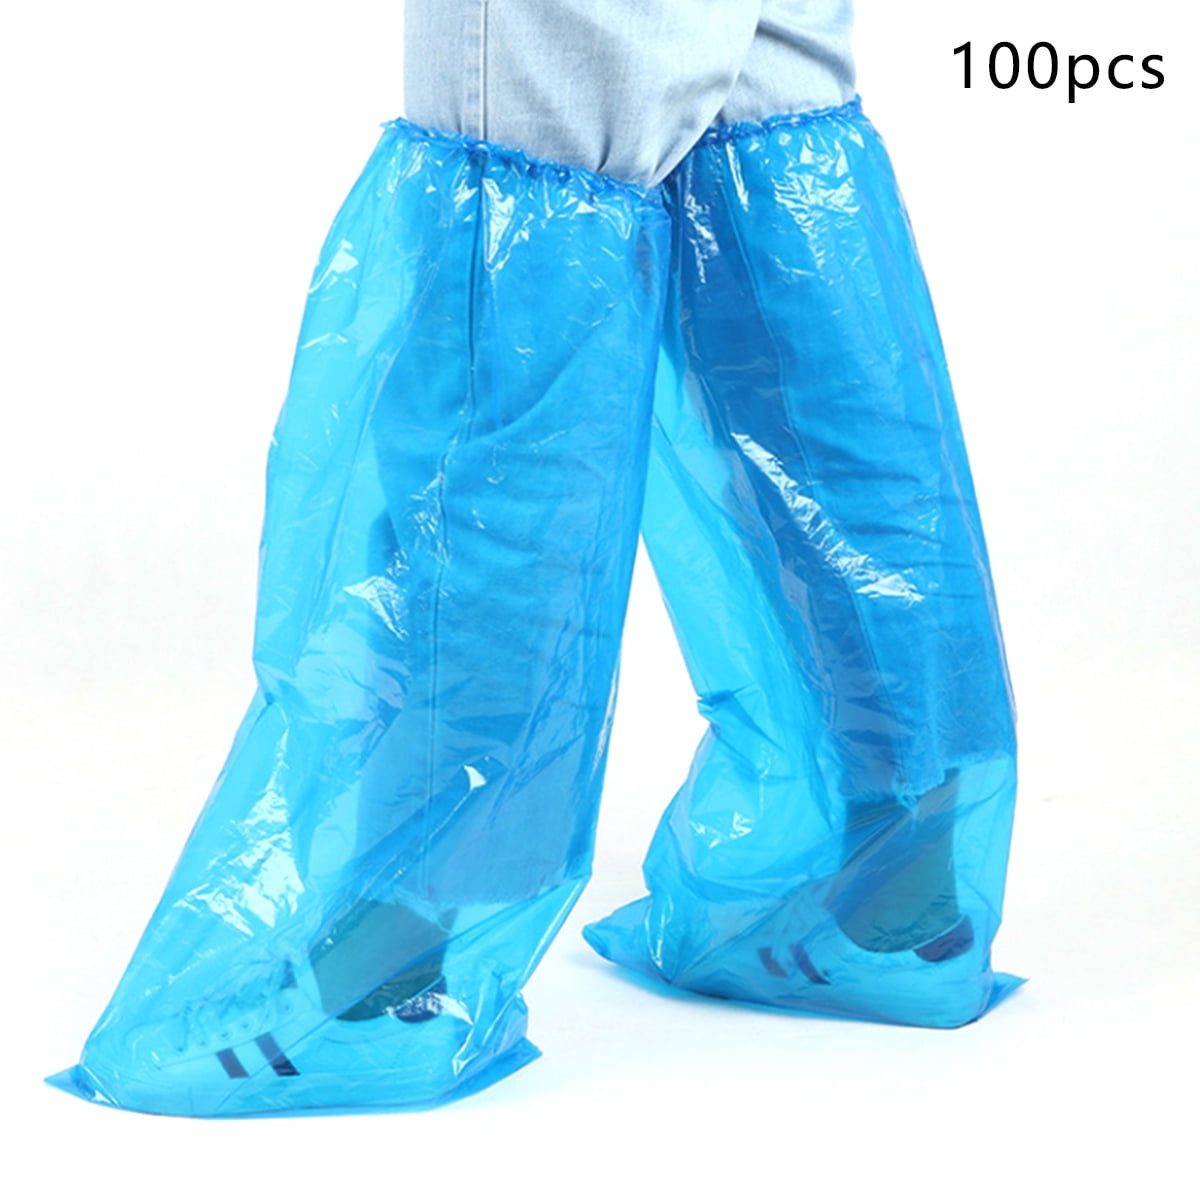 SeniorMar Disposable Shoe Covers Blue Rain Shoes and Boots Cover Plastic Long Shoe Cover Clear Waterproof Anti-Slip Overshoe 